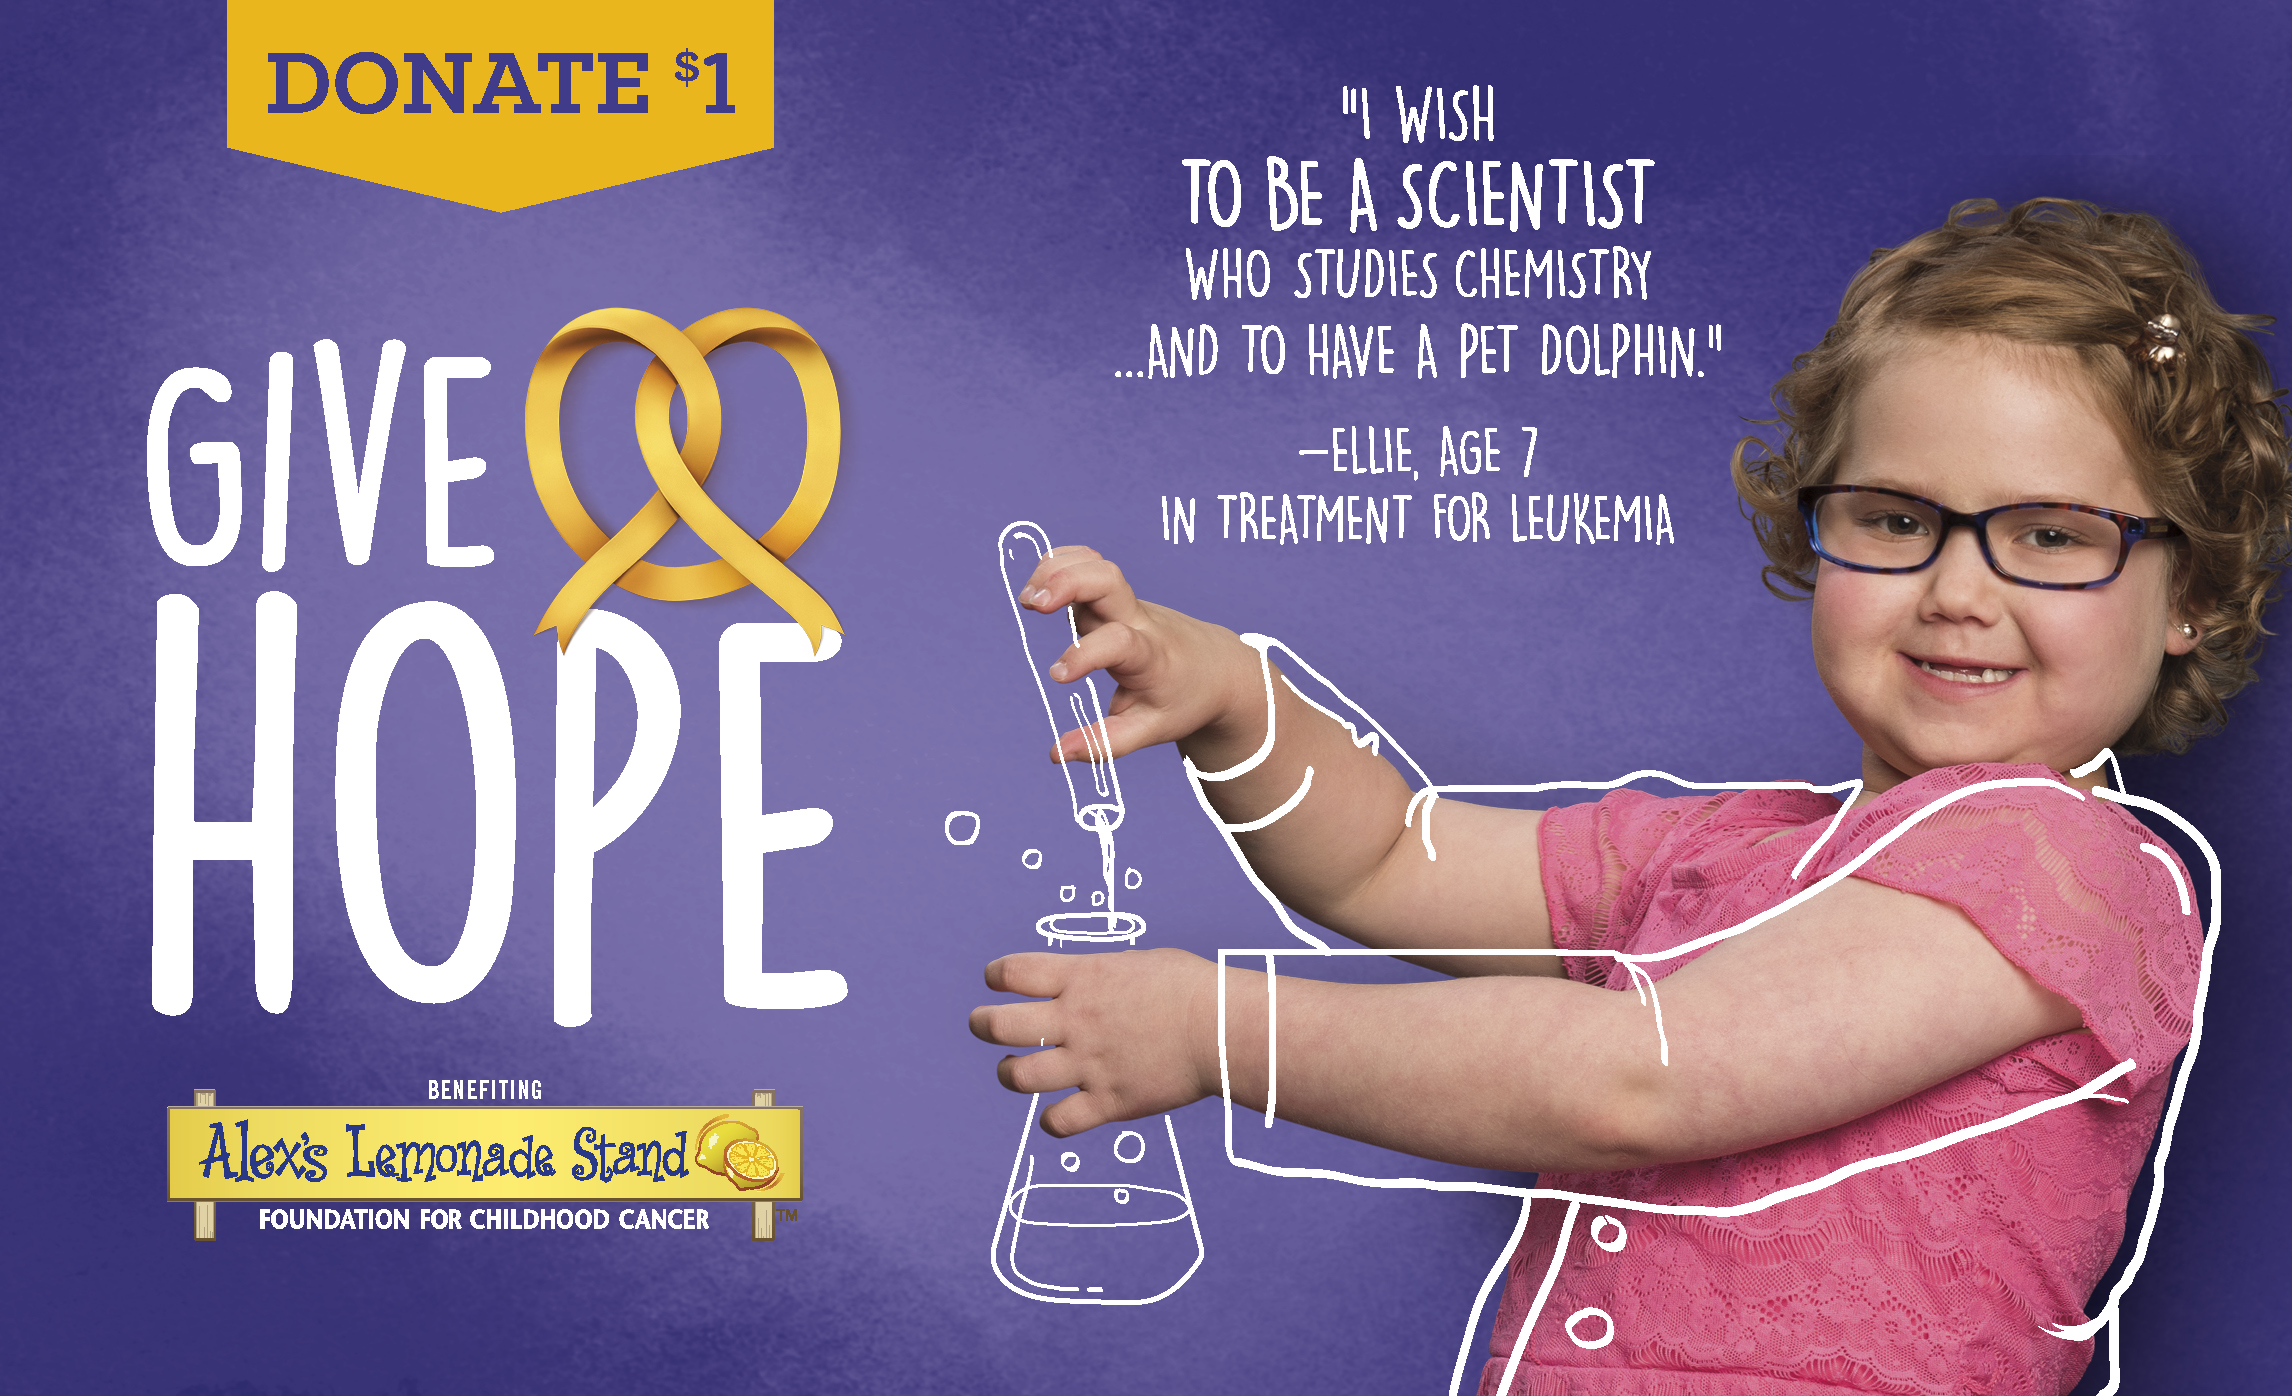 Auntie Anne’s® kicks off its fifth annual in-store fundraising campaign to support Alex’s Lemonade Stand Foundation 